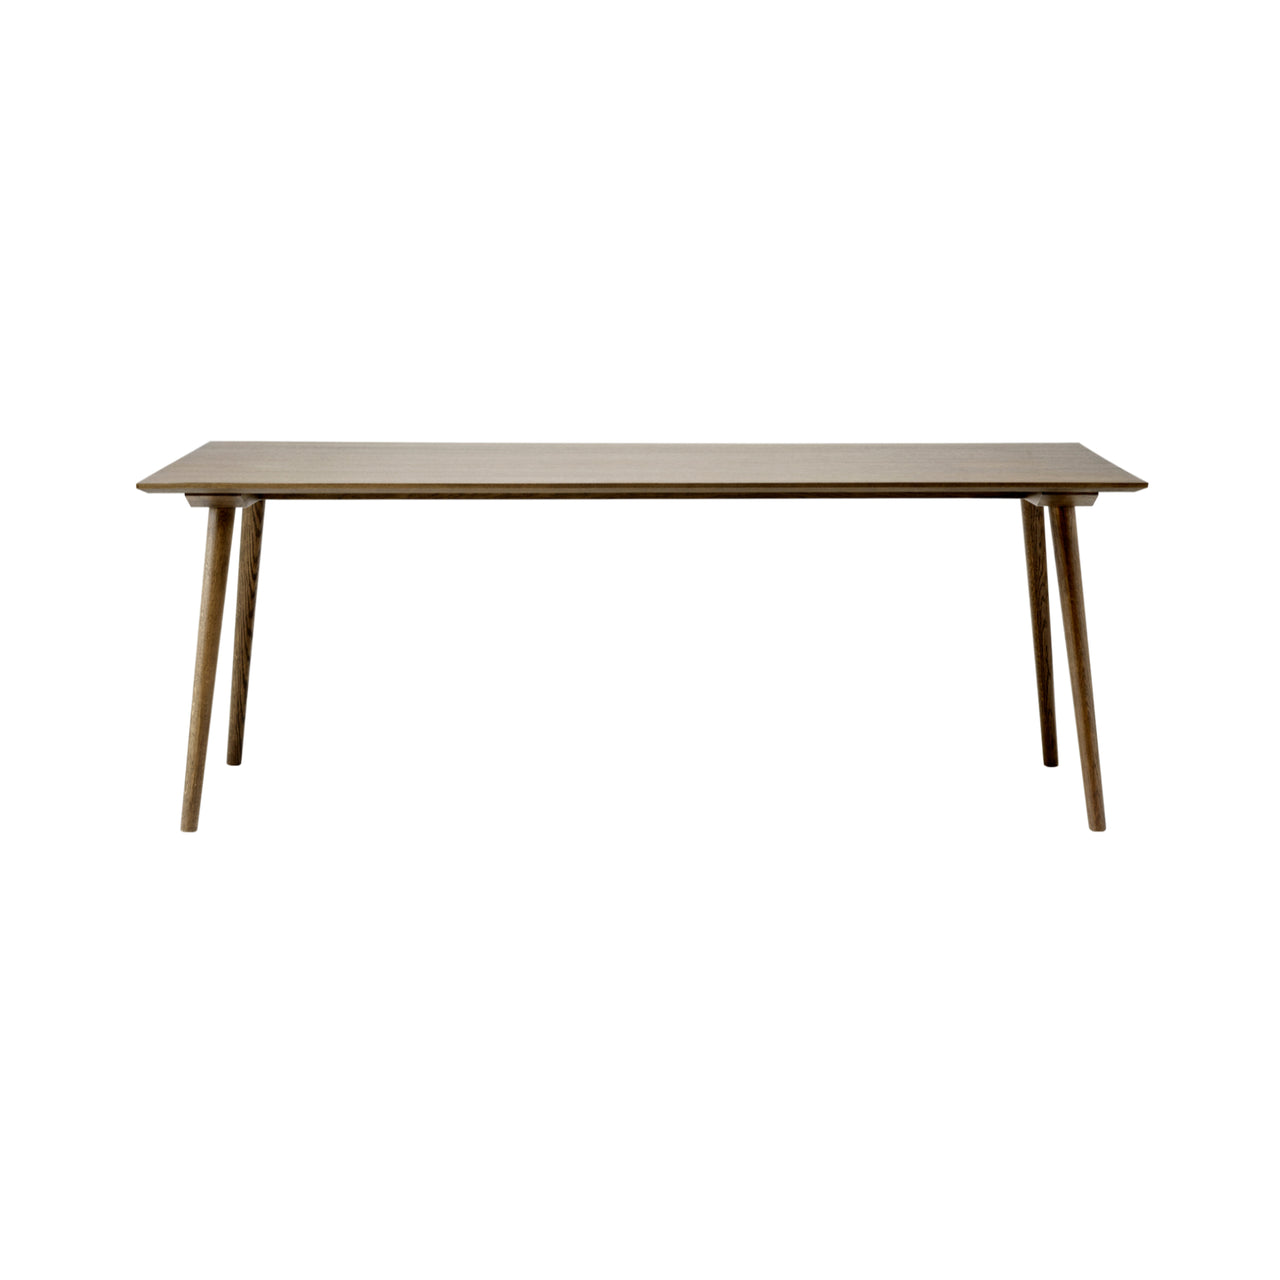 In Between Rectangular Dining Table SK5 + SK6: Small (SK5) - 78.7